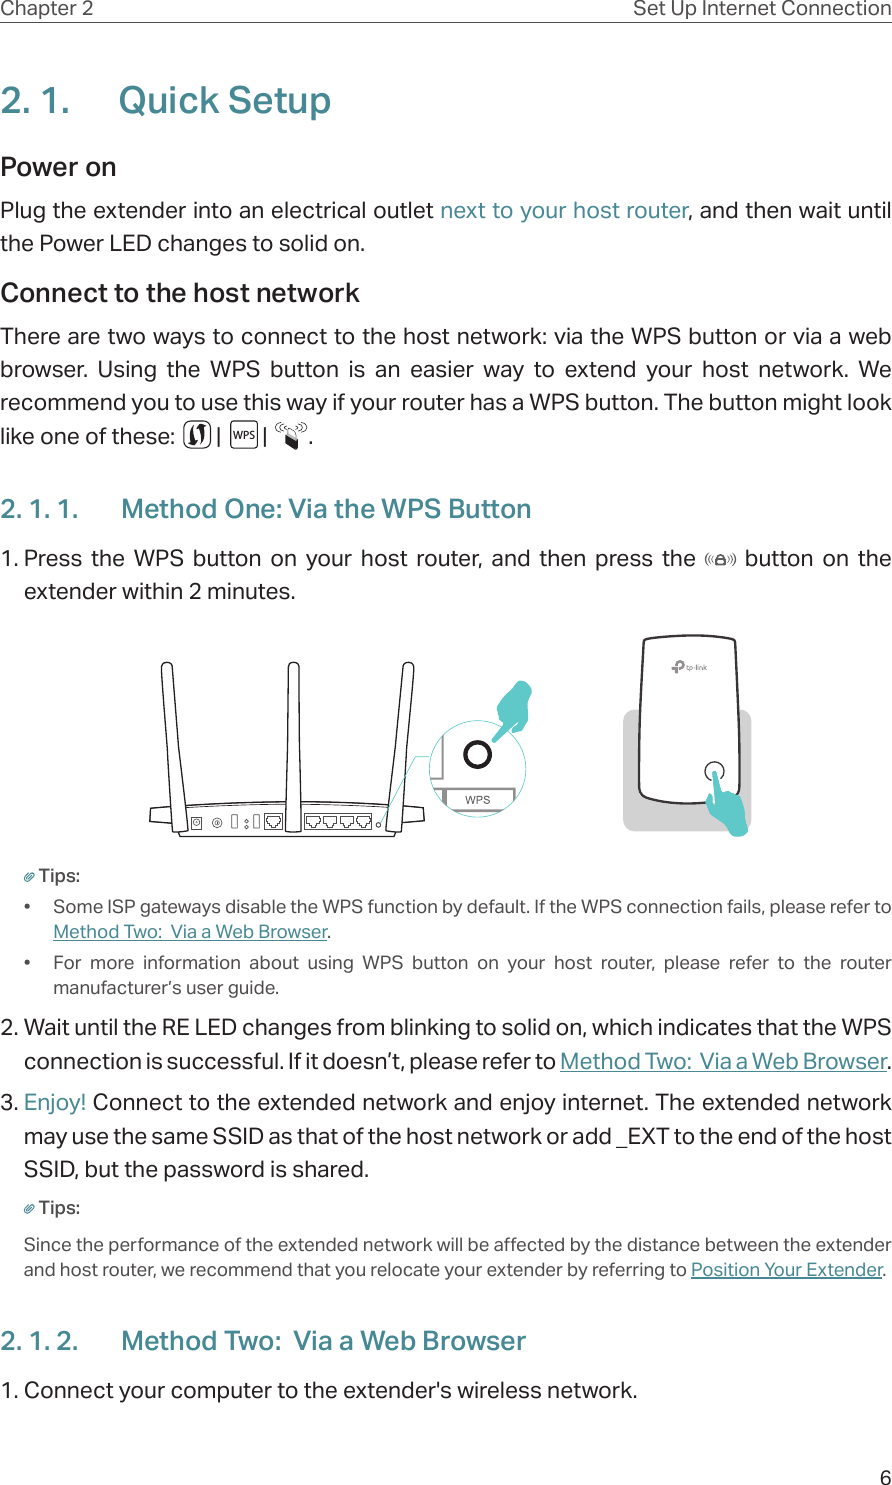 6Chapter 2 Set Up Internet Connection2. 1.  Quick SetupPower on Plug the extender into an electrical outlet next to your host router, and then wait until the Power LED changes to solid on.Connect to the host network There are two ways to connect to the host network: via the WPS button or via a web browser. Using the WPS button is an easier way to extend your host network. We recommend you to use this way if your router has a WPS button. The button might look like one of these:        |        |        .2. 1. 1.  Method One: Via the WPS Button1. Press the WPS button on your host router, and then press the   button on the extender within 2 minutes.Tips:•  Some ISP gateways disable the WPS function by default. If the WPS connection fails, please refer to Method Two:  Via a Web Browser.•  For more information about using WPS button on your host router, please refer to the router manufacturer’s user guide.2. Wait until the RE LED changes from blinking to solid on, which indicates that the WPS connection is successful. If it doesn’t, please refer to Method Two:  Via a Web Browser. 3. Enjoy! Connect to the extended network and enjoy internet. The extended network may use the same SSID as that of the host network or add _EXT to the end of the host SSID, but the password is shared.Tips:Since the performance of the extended network will be affected by the distance between the extender and host router, we recommend that you relocate your extender by referring to Position Your Extender.2. 1. 2.  Method Two:  Via a Web Browser1. Connect your computer to the extender&apos;s wireless network.WPS